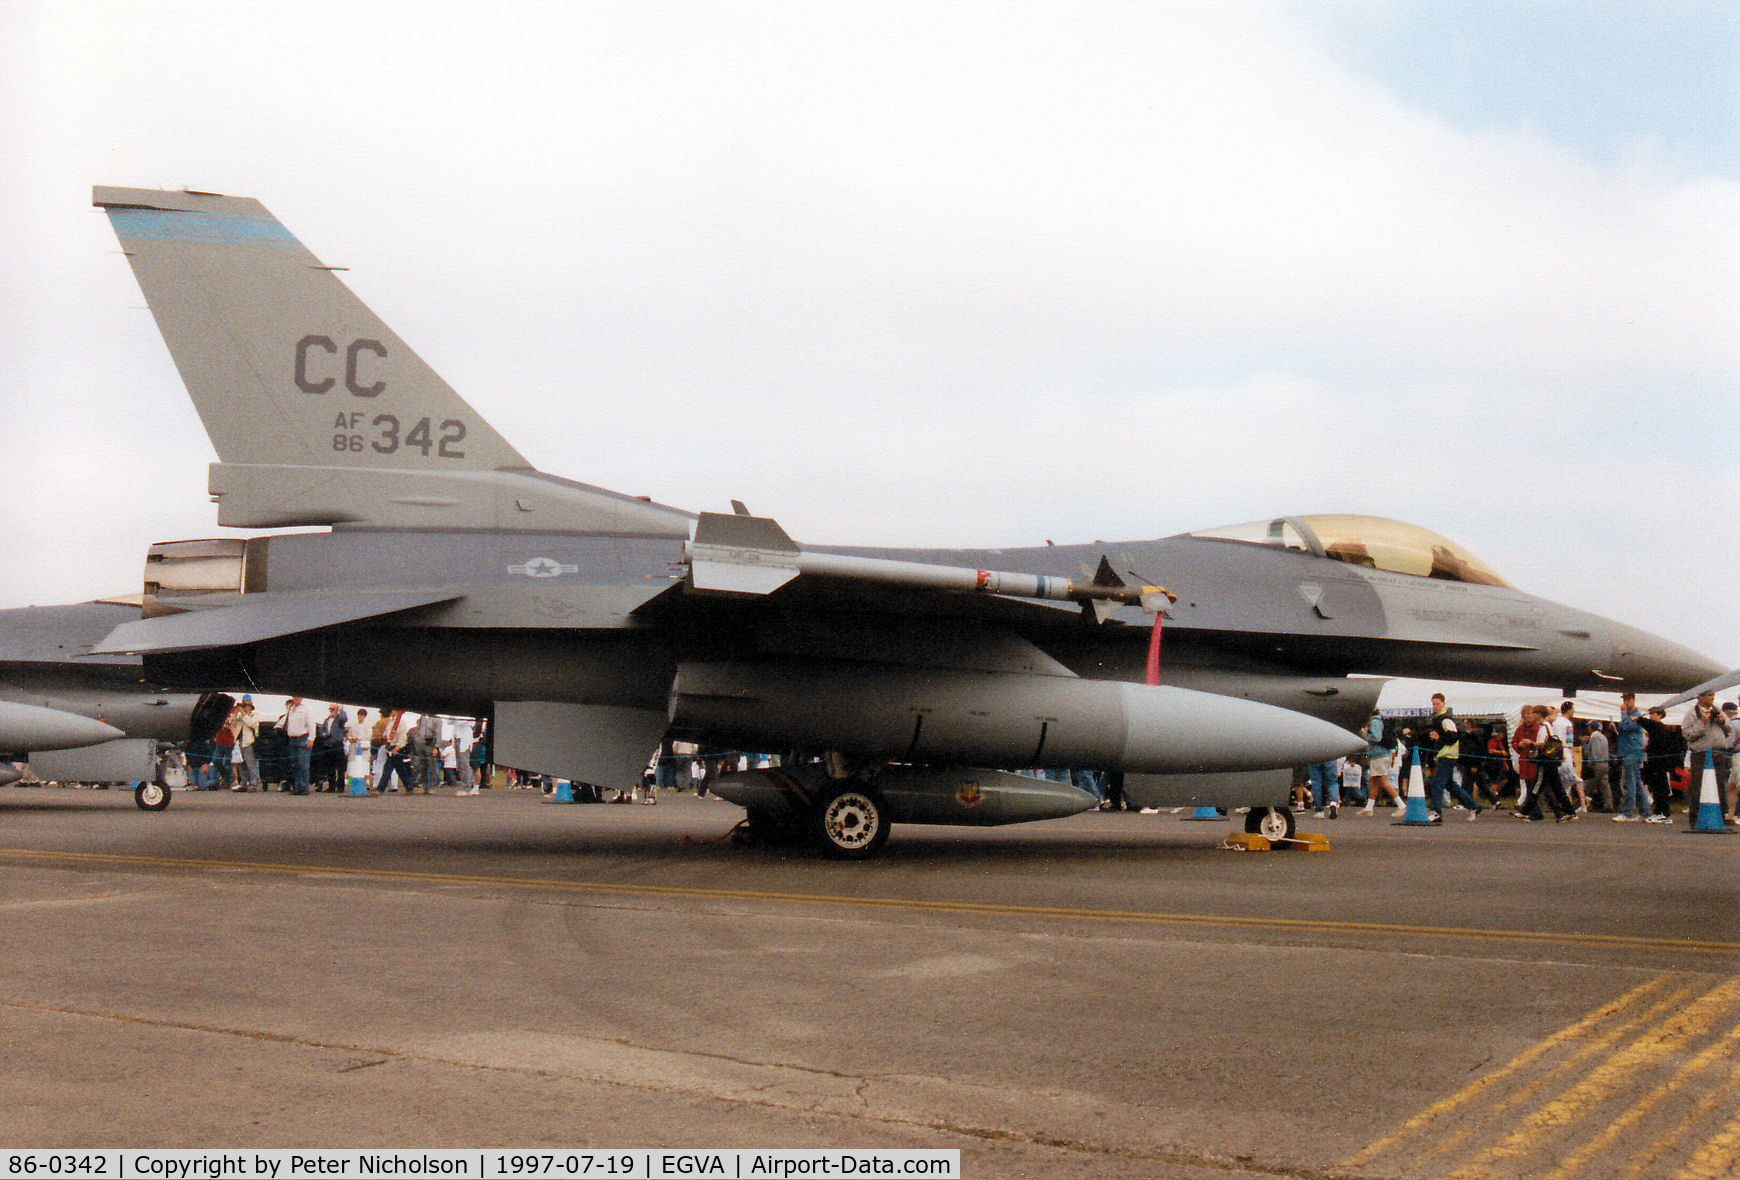 86-0342, 1986 General Dynamics F-16C Fighting Falcon C/N 5C-448, F-16C Falcon, callsign Chosen 02, of 523rd Fighter Squadron/27th Fighter Wing at Cannon AFB on display at the 1997 Intnl Air Tattoo at RAF Fairford.